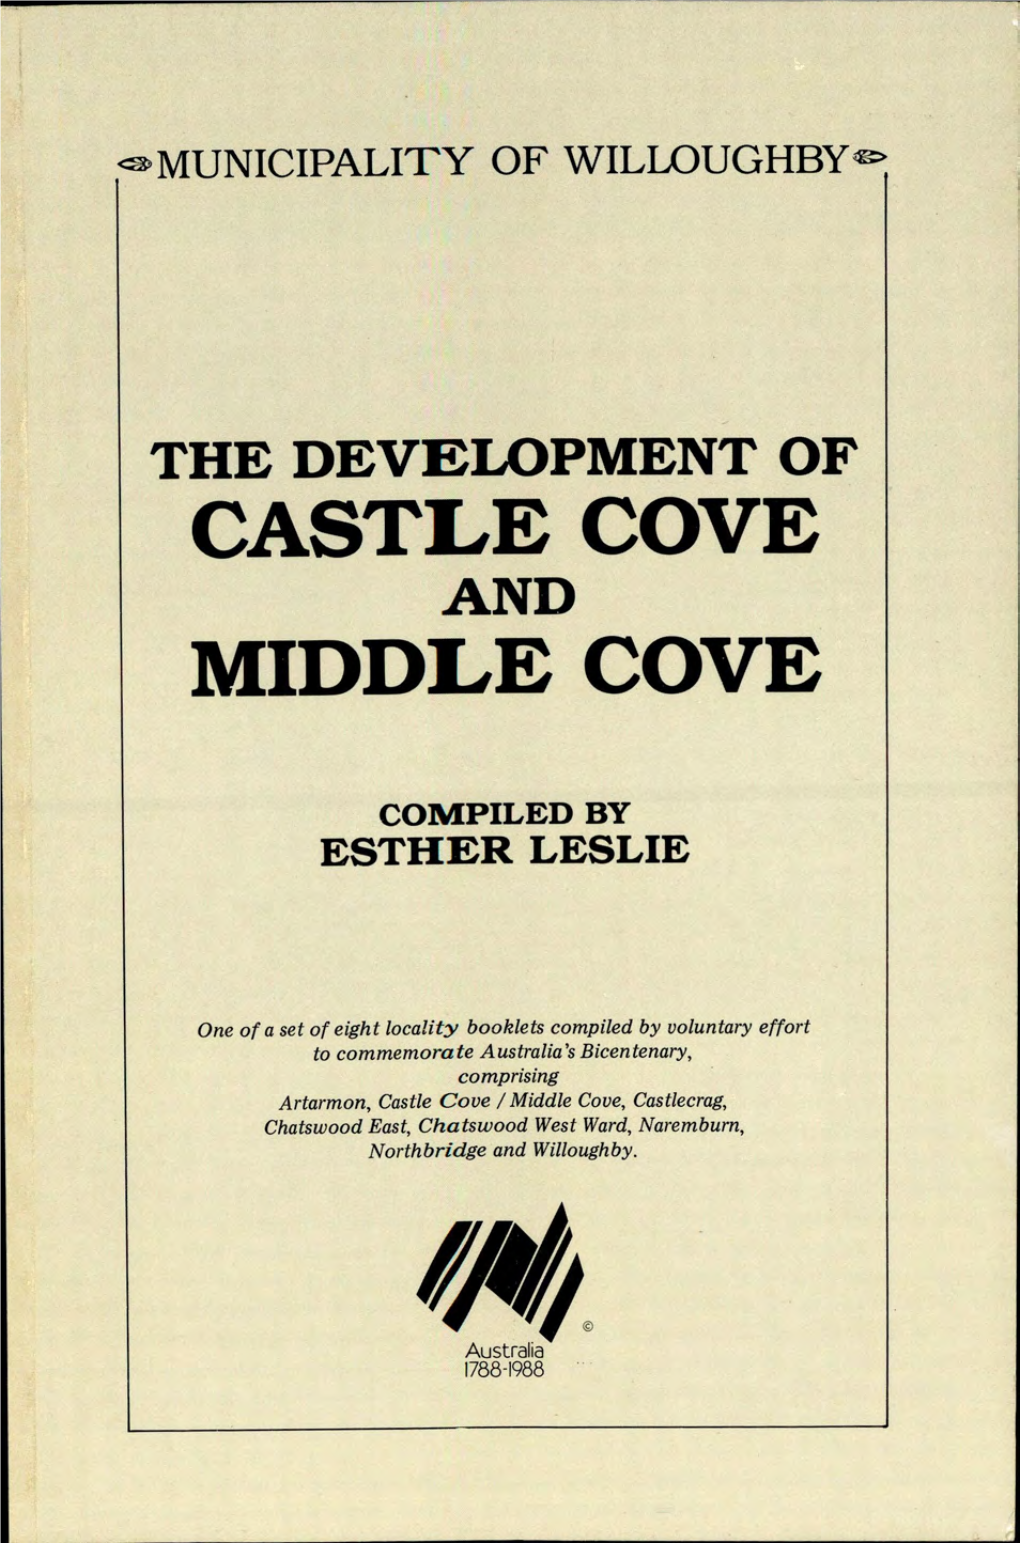 The Development of Castle Cove and Middle Harbour Compiled by Esther